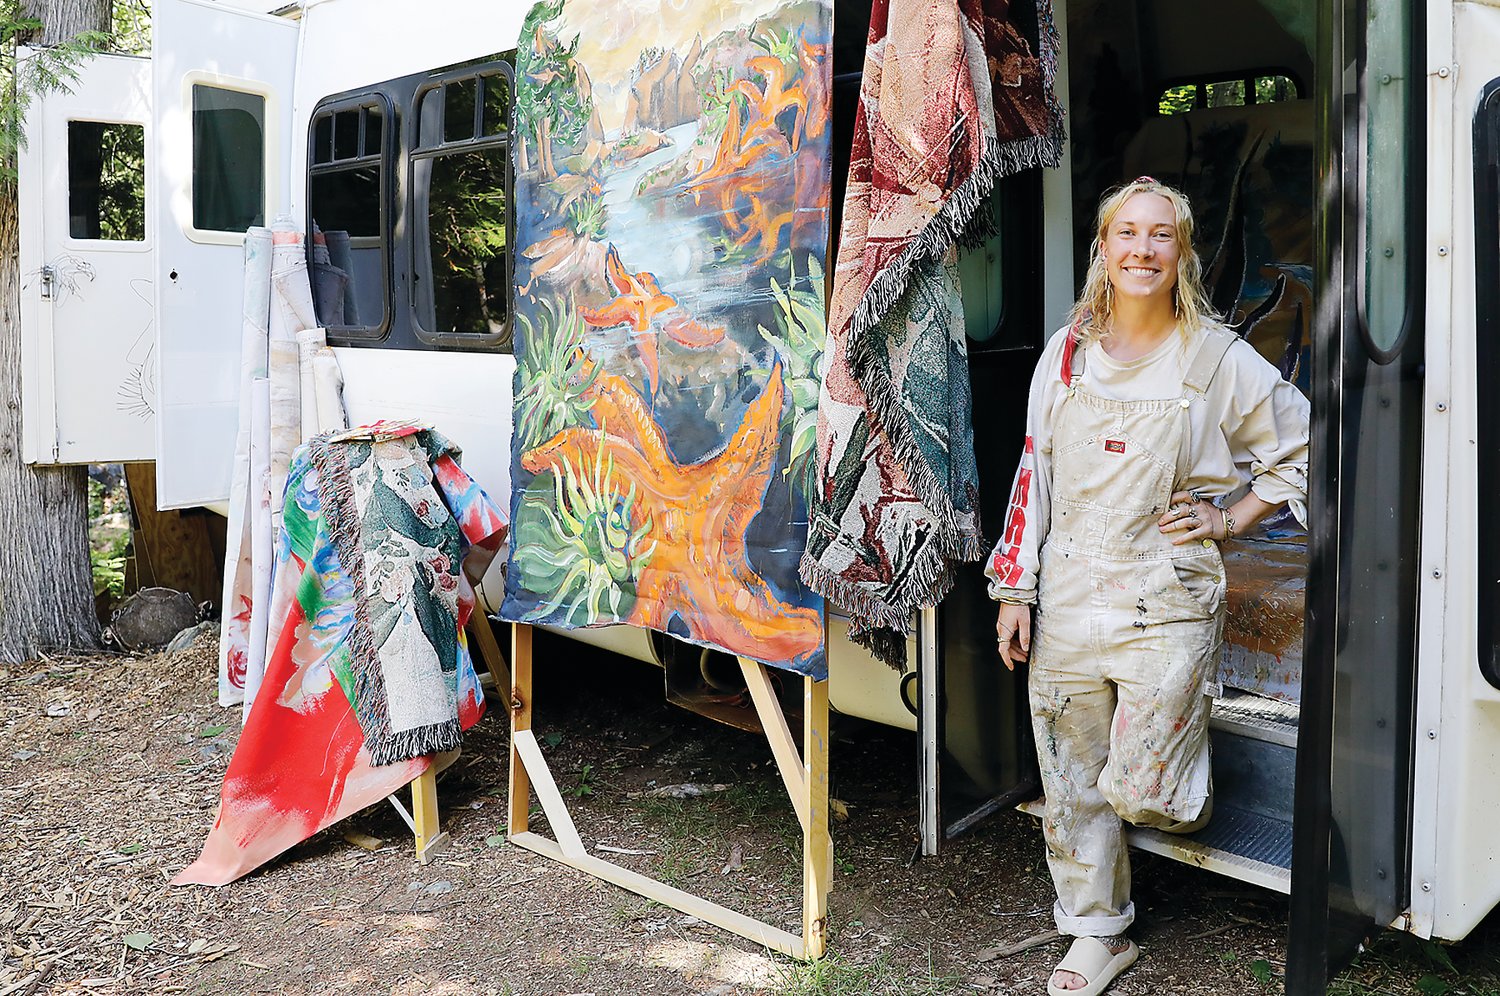 Leah Reusch outside of her studio, created from a renovated old passenger bus.